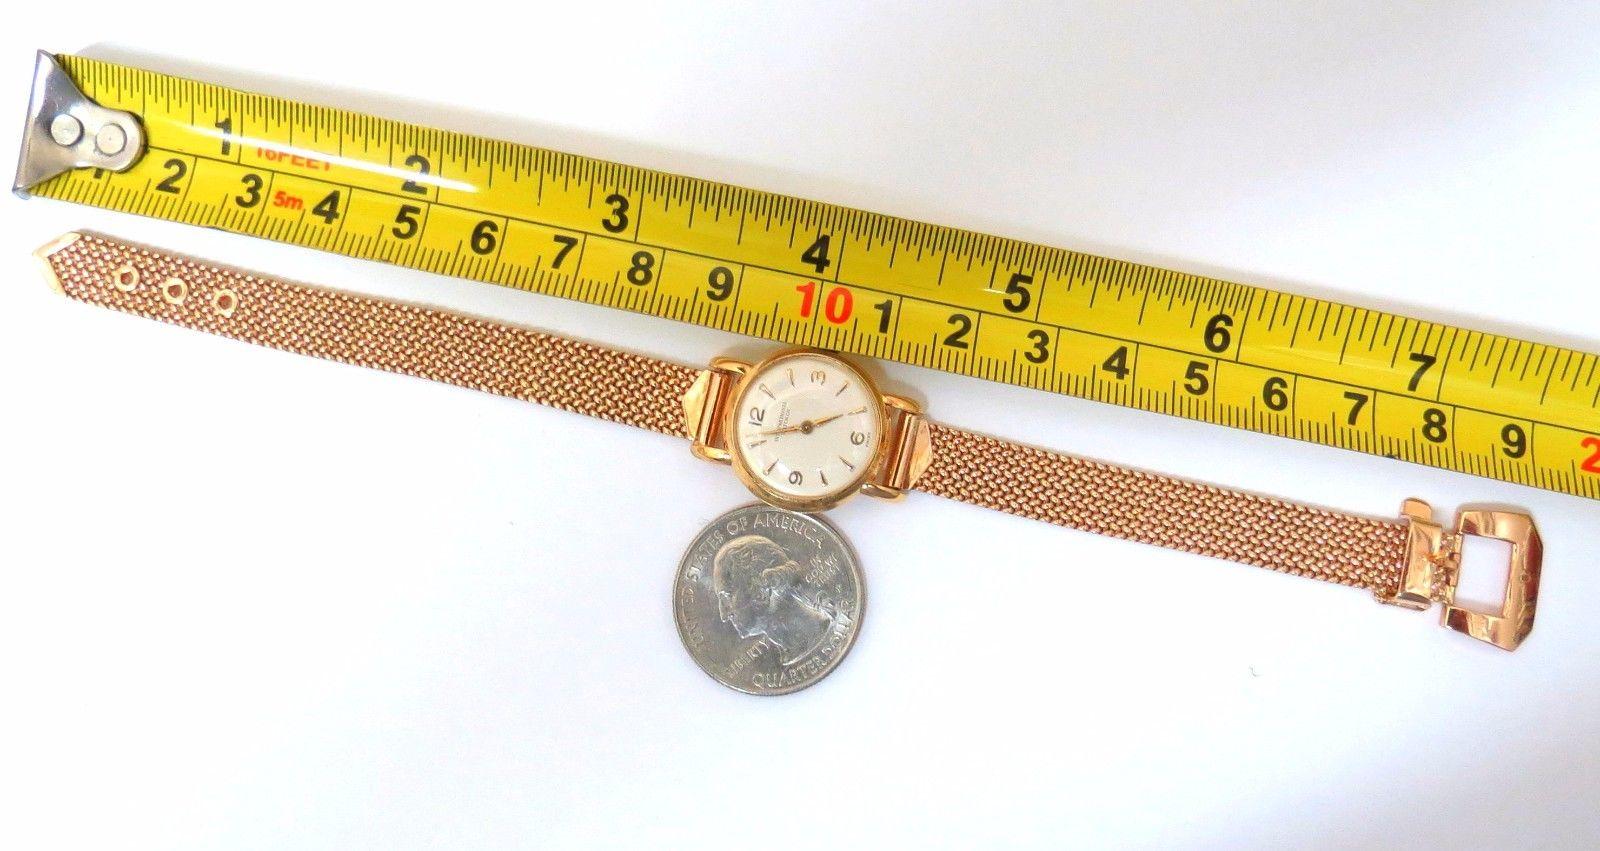 Estate IWC Authentic

Ladies IWC/ De Ville watch

Watch is in working condition

Very good condition overall

gorgeous mesh belt like band 

casing of watch is: 20mm wide

buckle clasp: 17mm

31 grams

7.5 inches long and can be worn in 3 adjustable